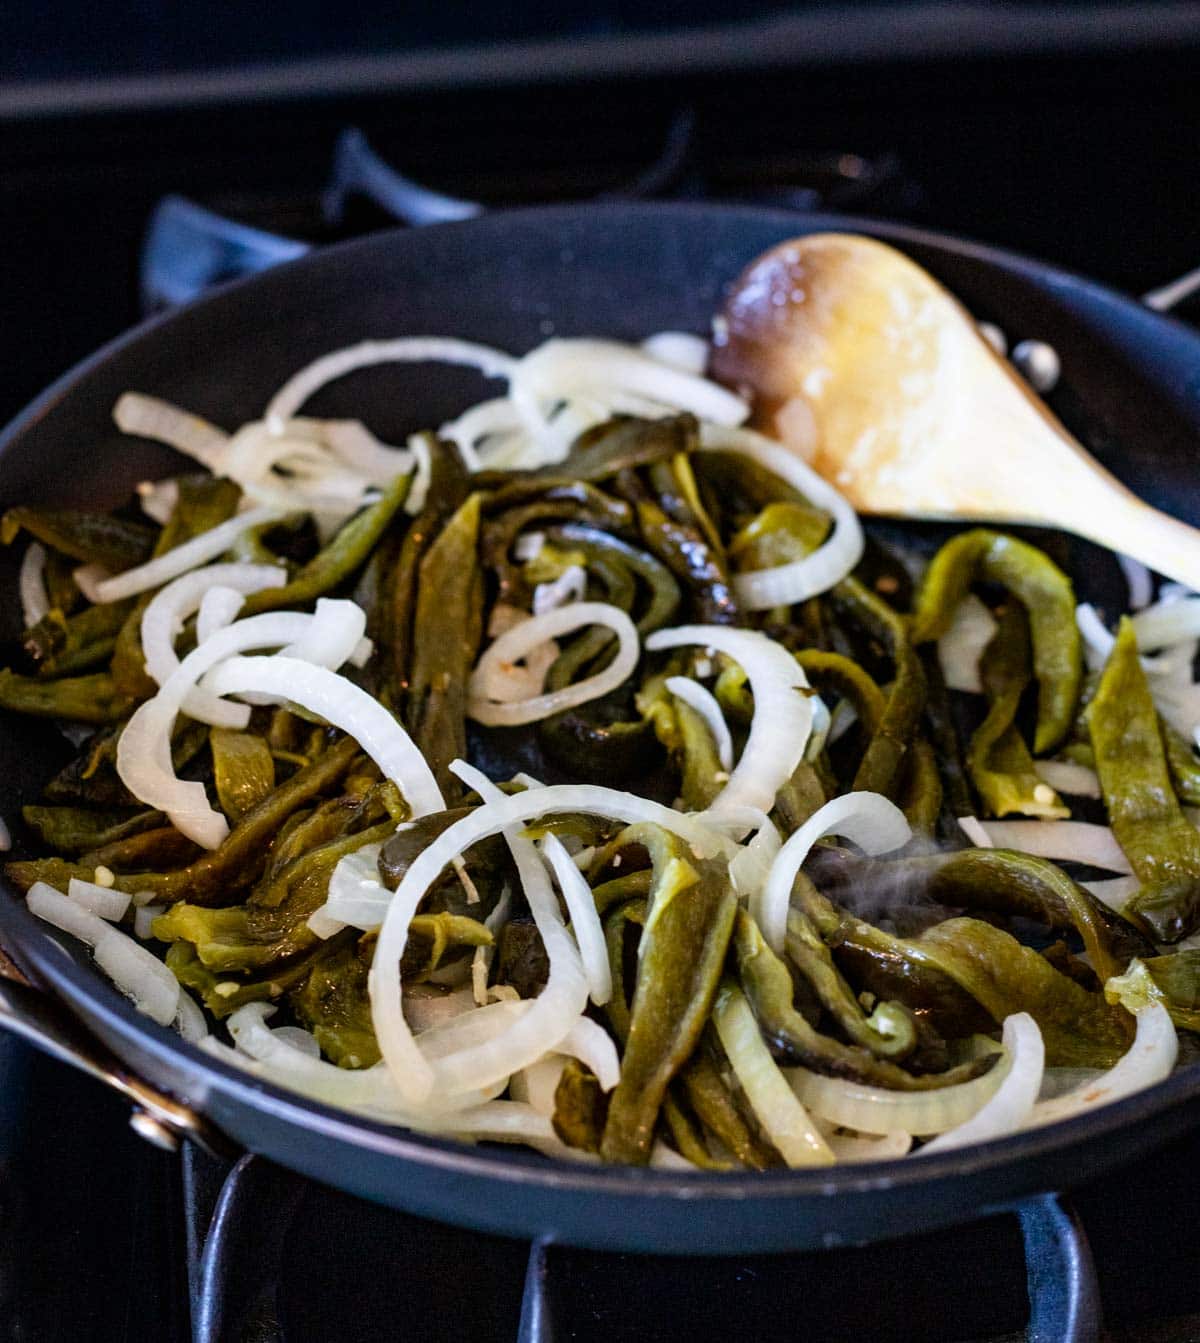 Sliced onions and strips of roasted poblano peppers cooking in a skillet.